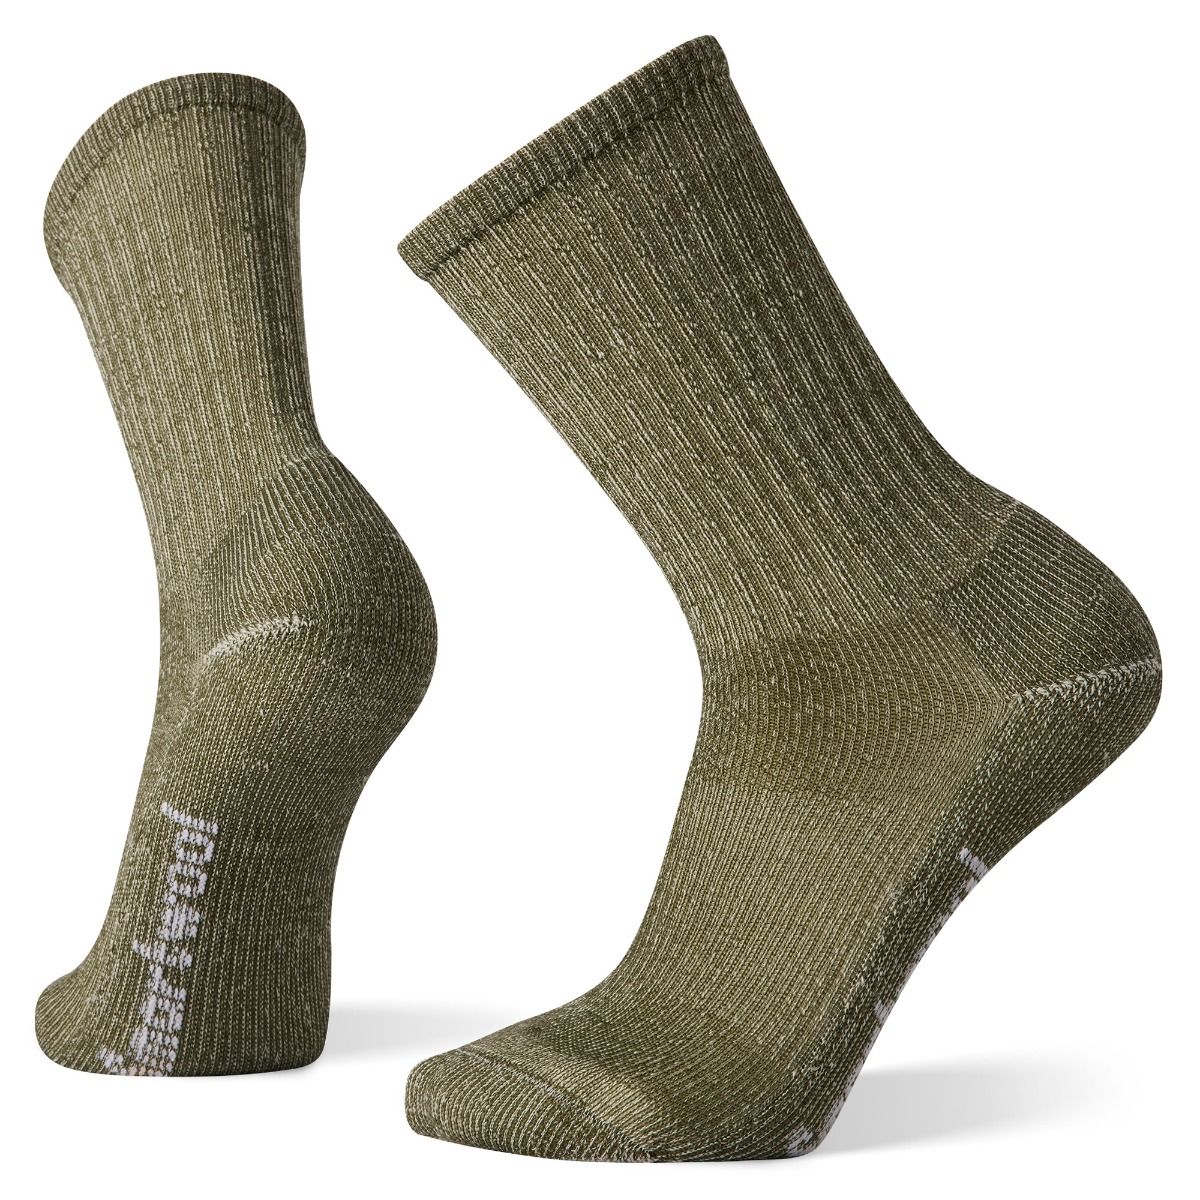 https://smartwool.ca/media/catalog/product/cache/7b241bfd6c26fd1ffc0d56d7717f5c2b/s/w/sw012900d11-1-p_1.jpg